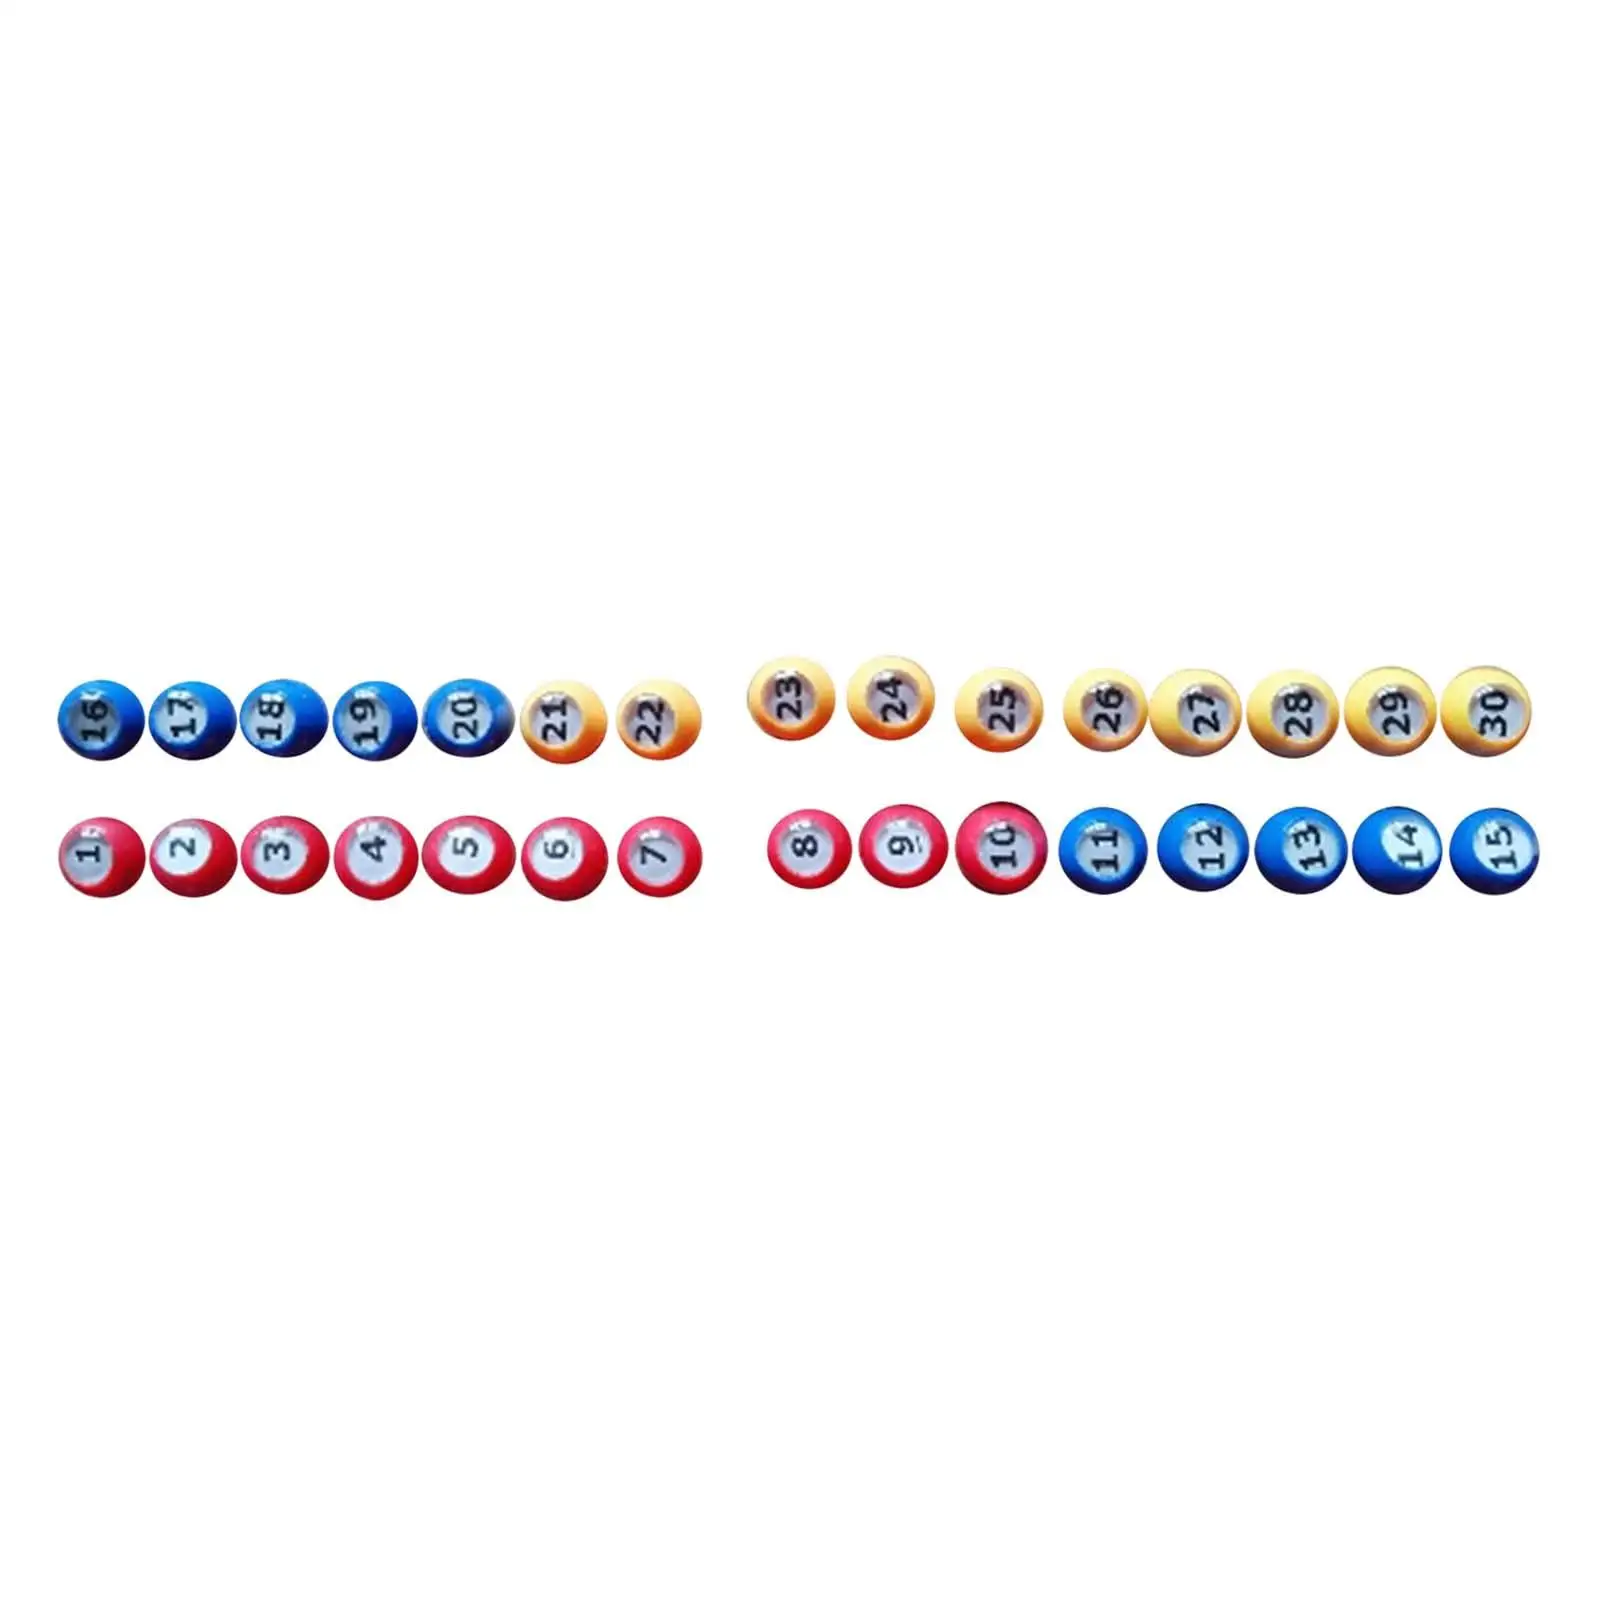 30x Bingo Ball Replacement Equipment with Easy Read Window Raffle Balls for Household Office Birthday Traveling Entertainment